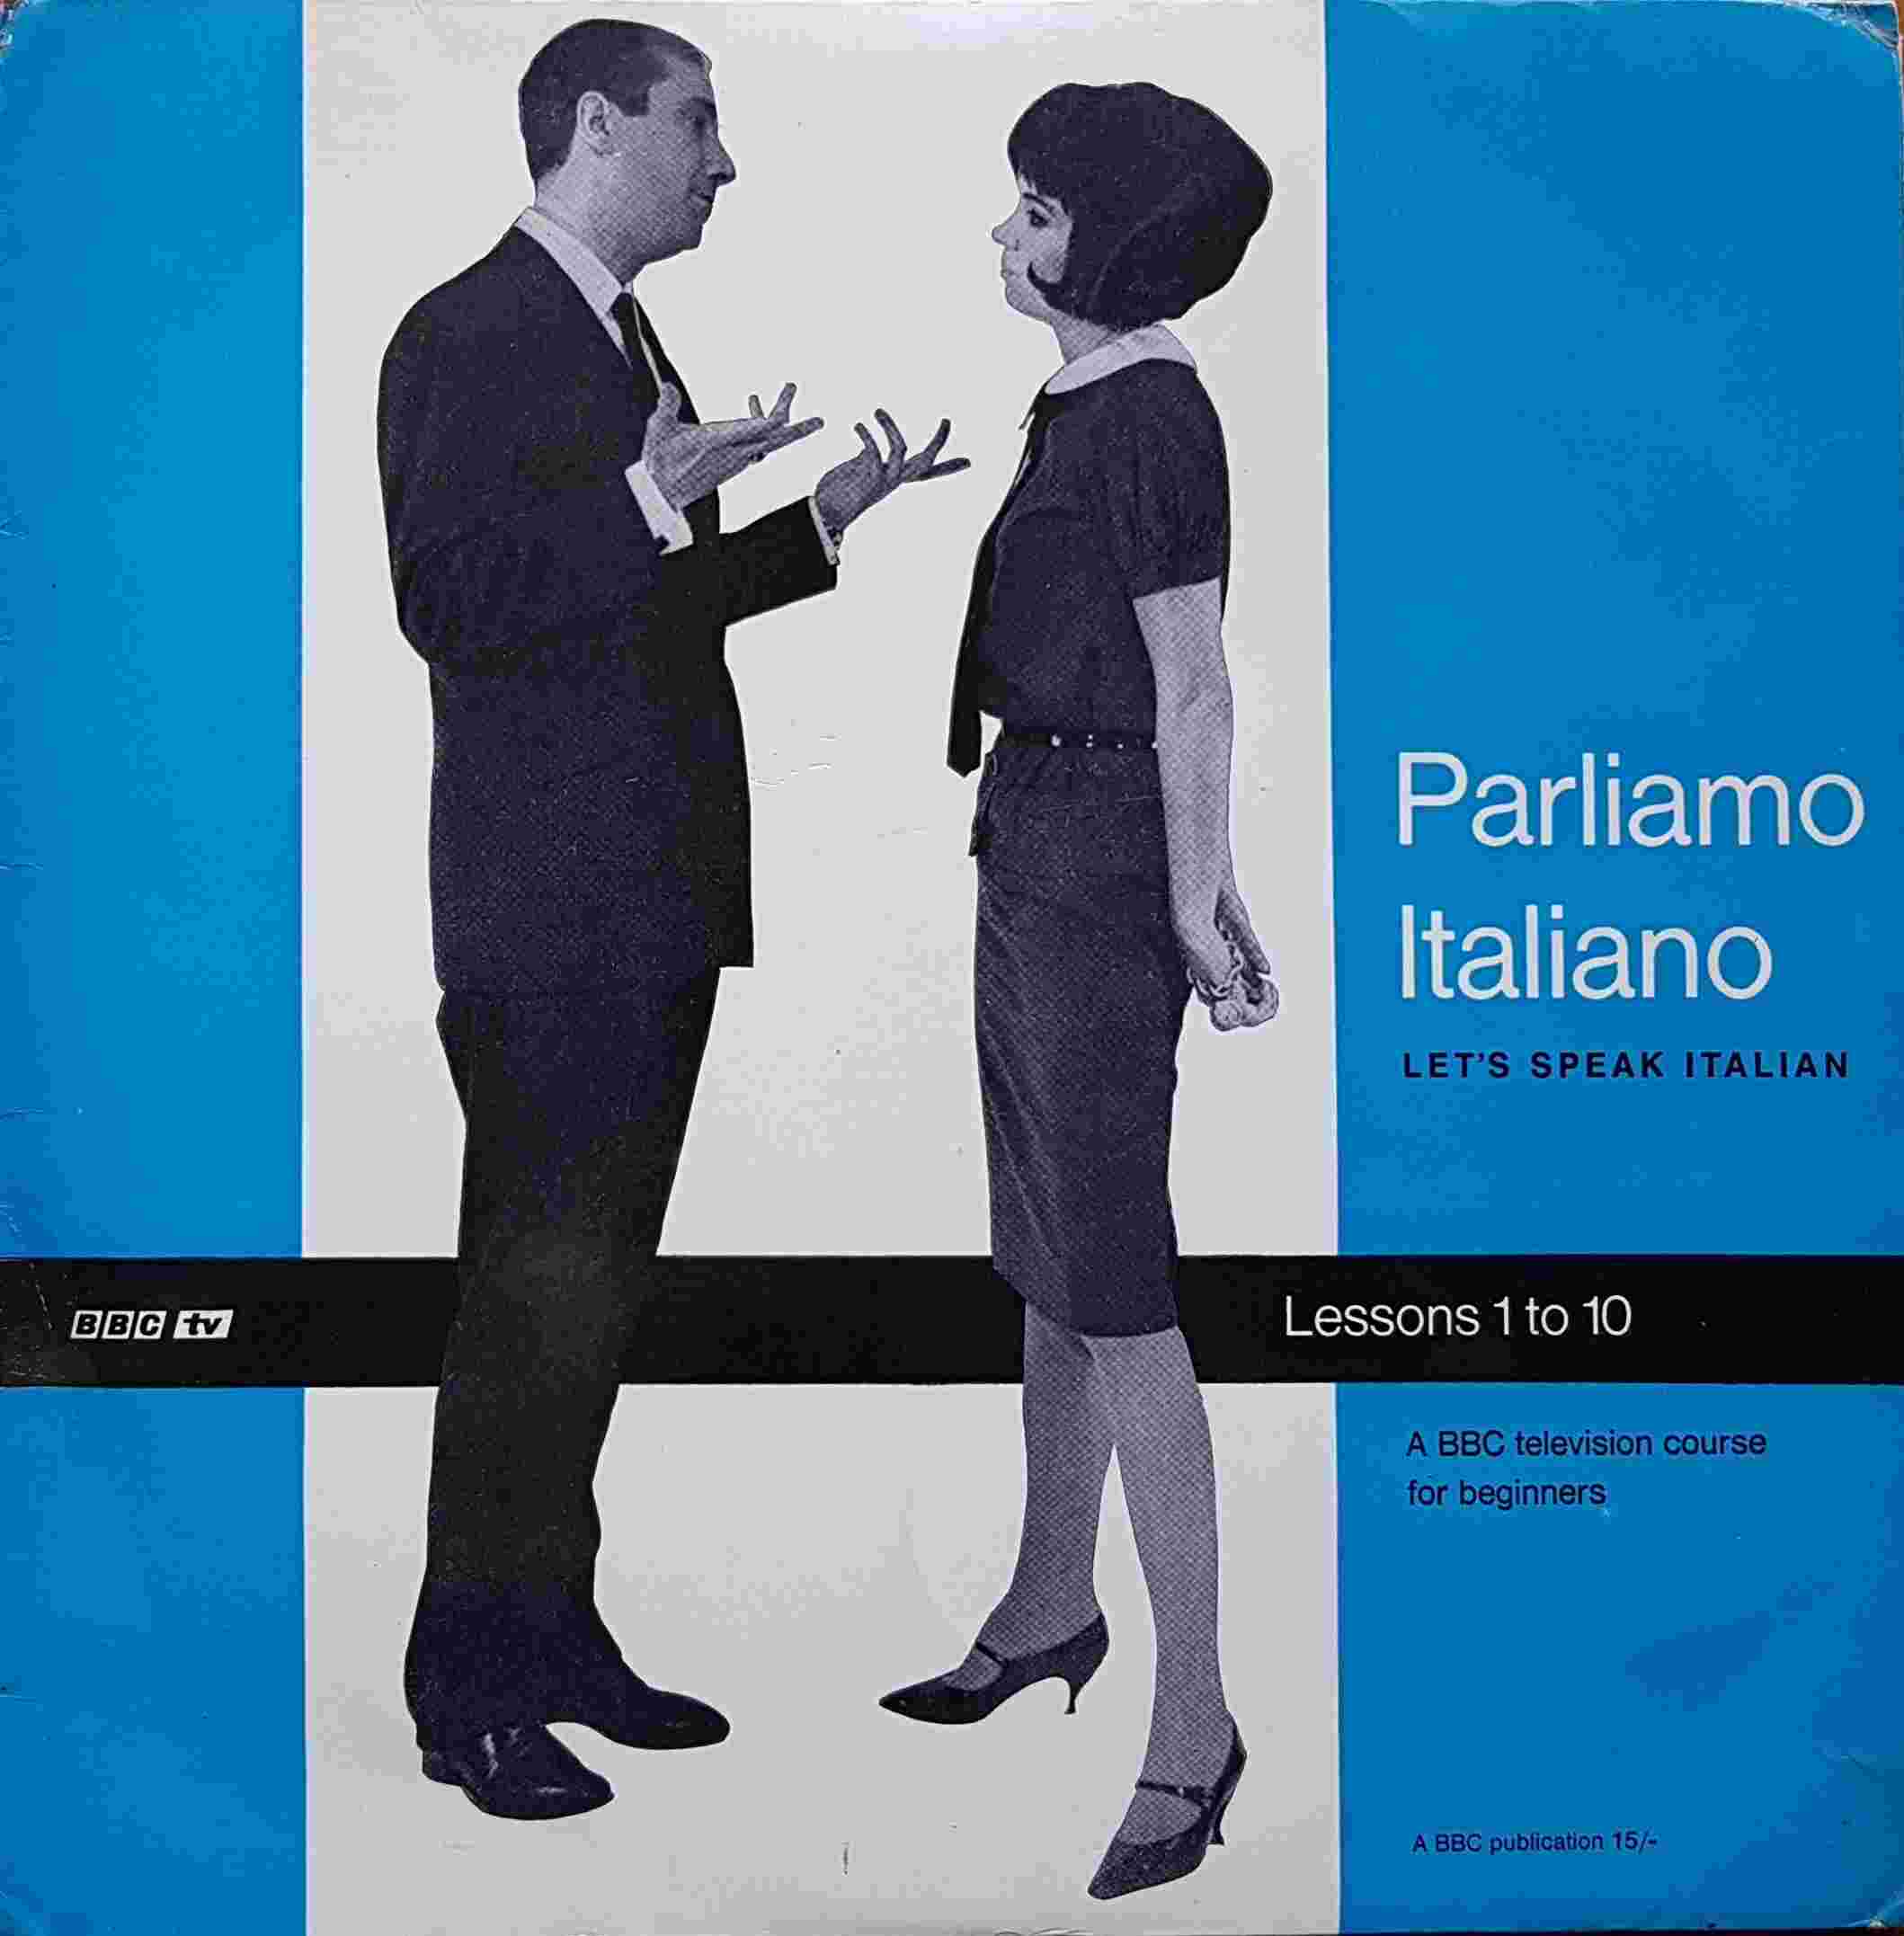 Picture of OP 1/2 Parliamo Italiano - Let's Speak Italian lessons 1 - 10 by artist Toni Cerutti from the BBC albums - Records and Tapes library